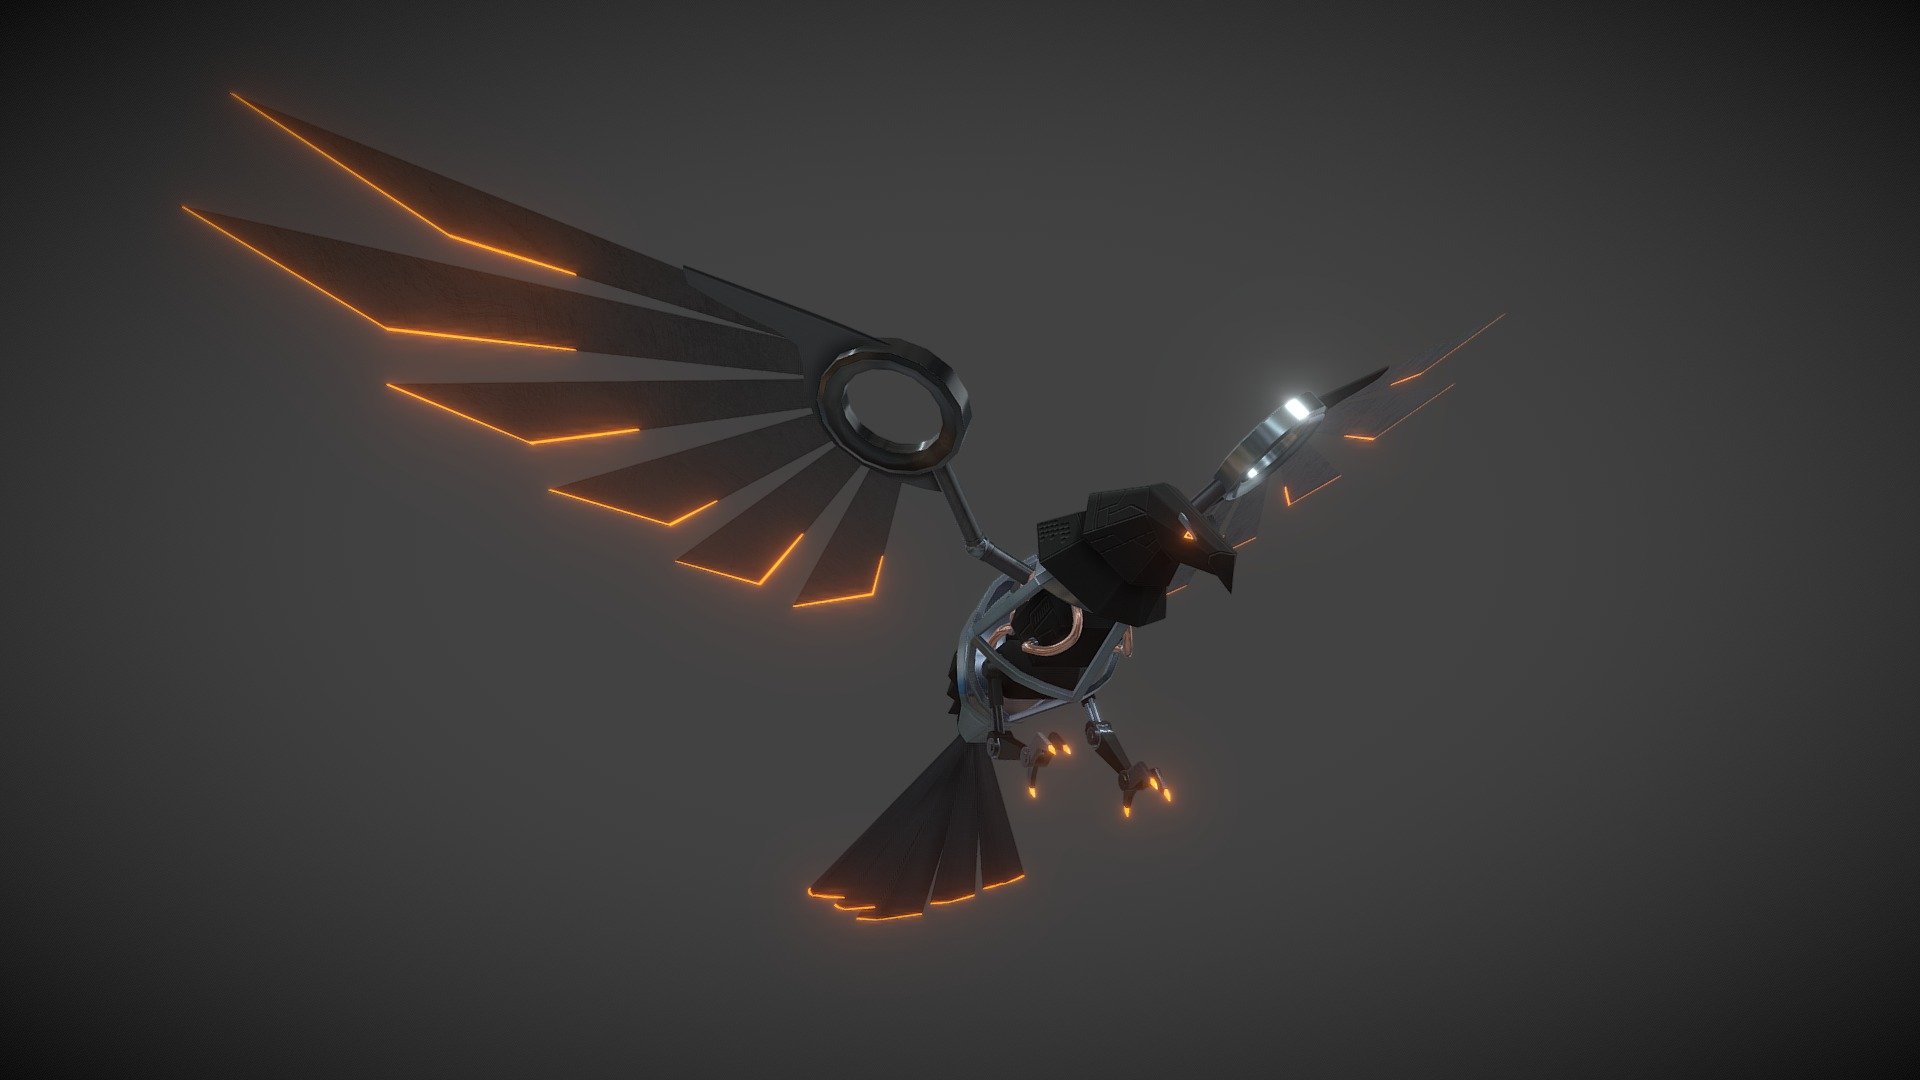 Hardsurface model for UE4 Render. The design is more on the futuristic side where the parts are not too worn or rusty like you see on a more steampunky themed model - Mechanical Eagle - Download Free 3D model by Neil Laguardia (@Neil_Laguardia) 3d model